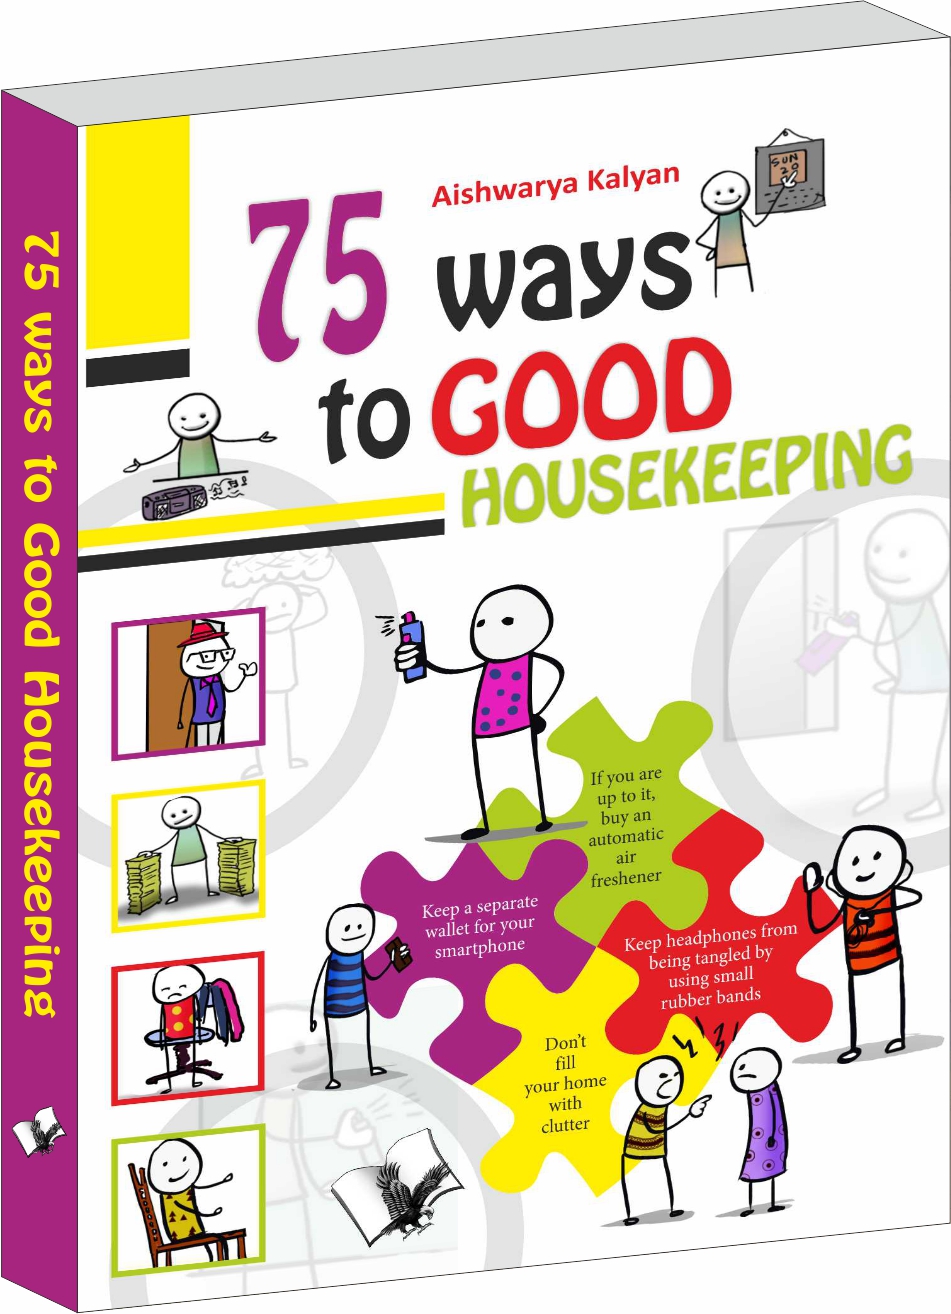 75-ways-to-good-housekeeping-illustrated-with-one-liners-on-each-page-for-a-quick-read